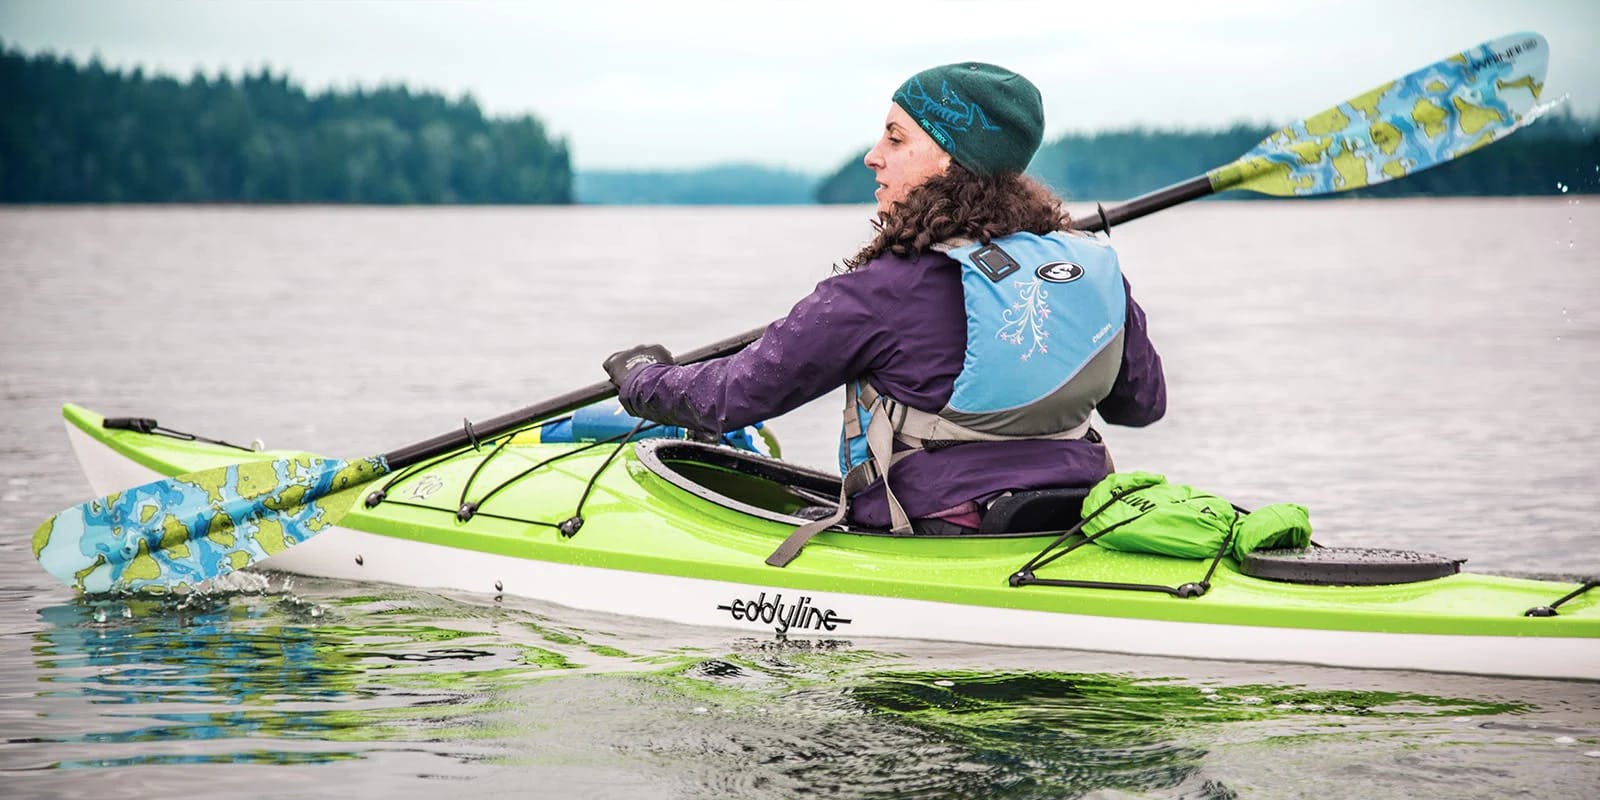 The Best Way to Keep Your Head Warm in Kayak